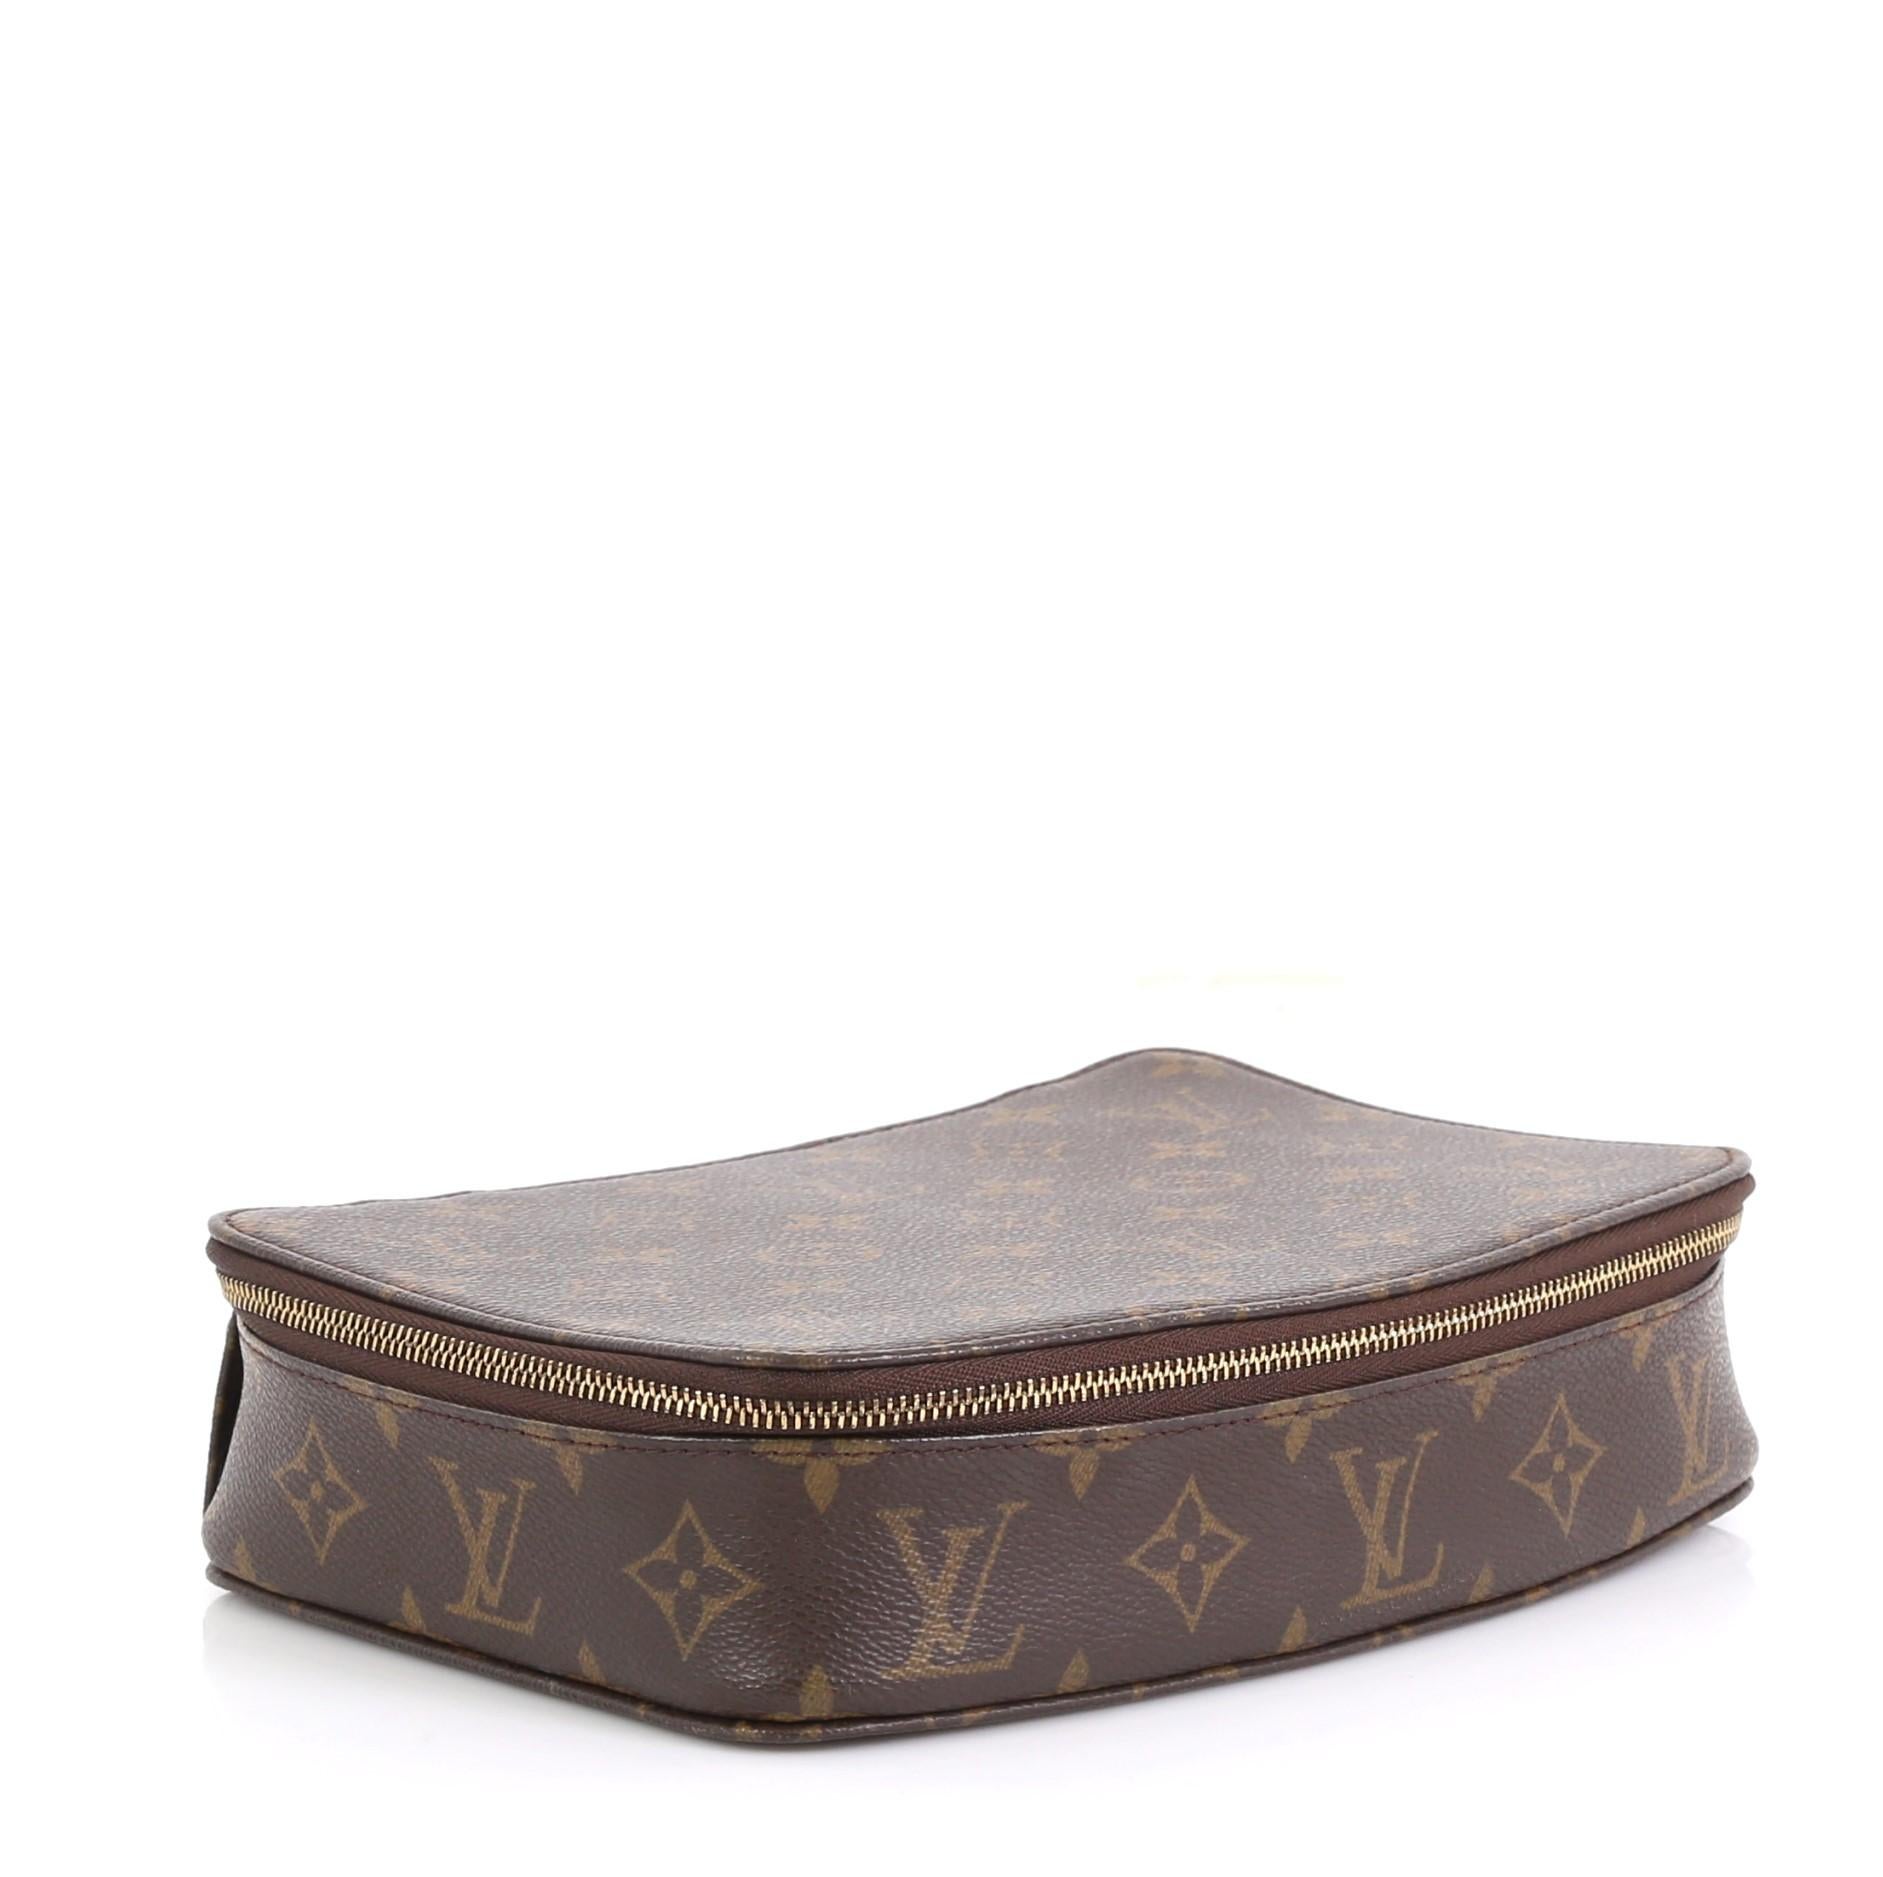 This Louis Vuitton Monte-Carlo Jewelry Box Monogram Canvas, crafted from brown monogram coated canvas, features a structured silhouette and gold-tone hardware. Its zip-around closure opens to a beige microfiber interior with multiple pouch zipped